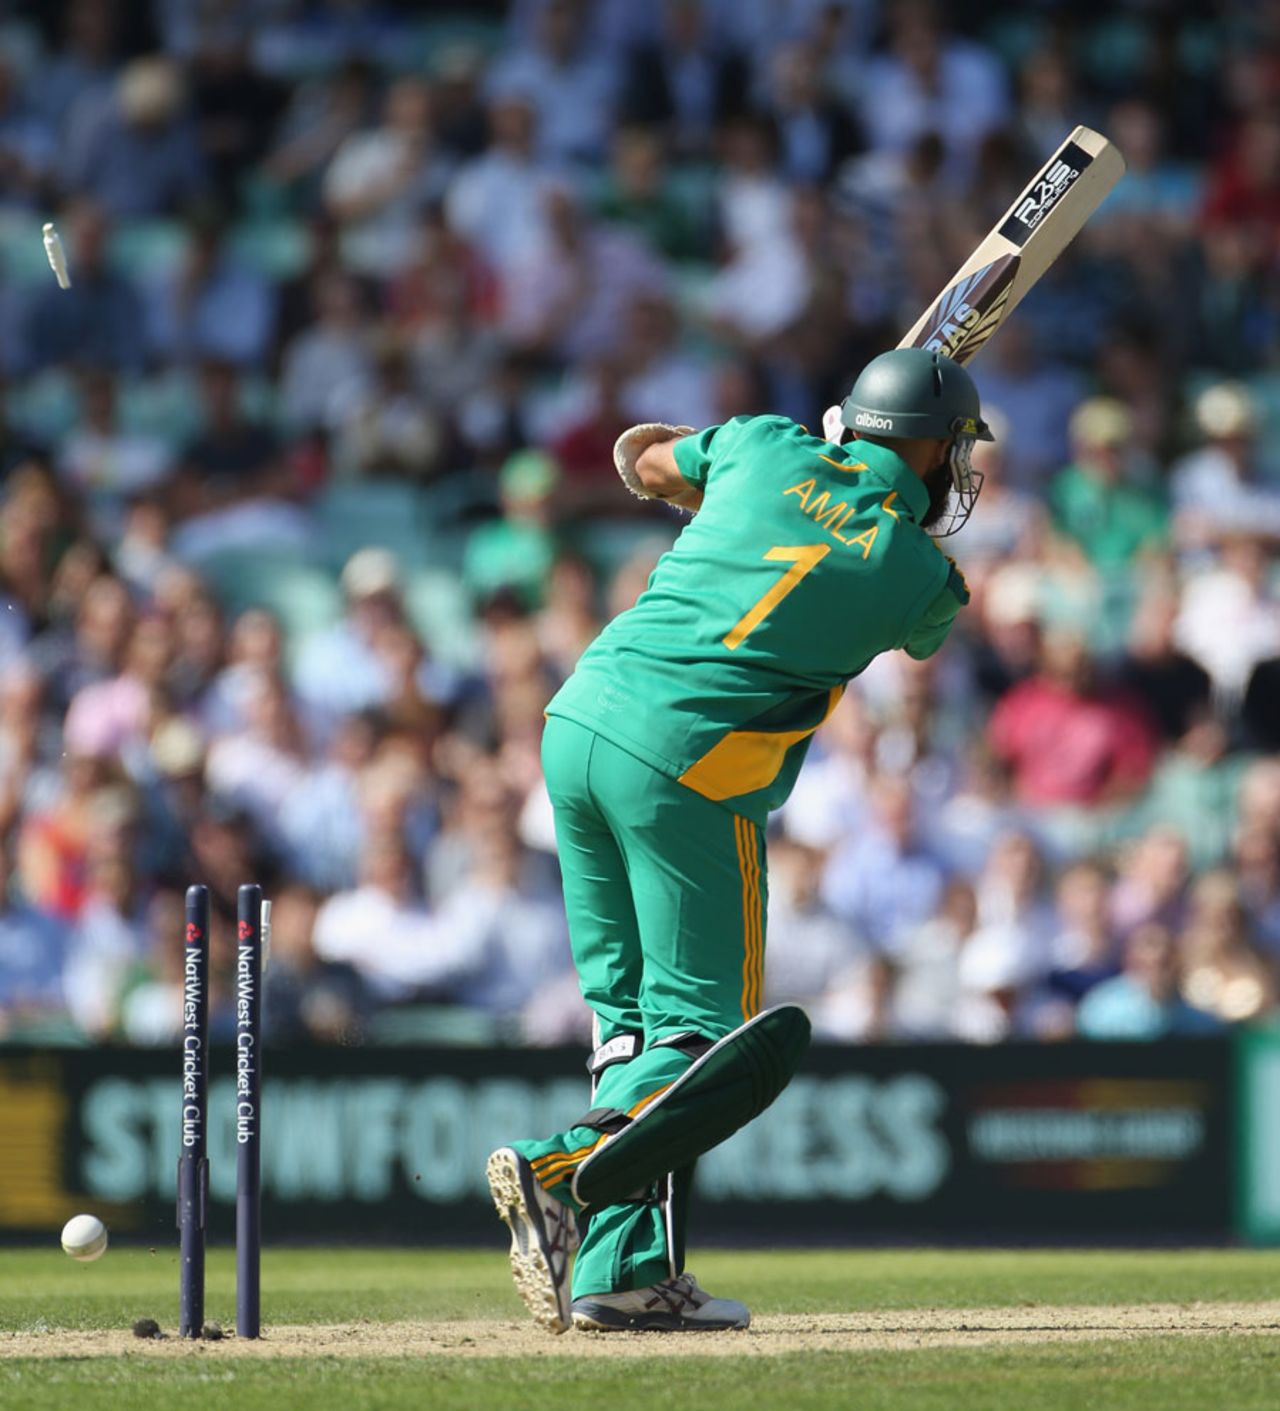 Hashim Amla has his leg stump flattened, England v South Africa, 3rd NatWest ODI, The Oval, August 31, 2012